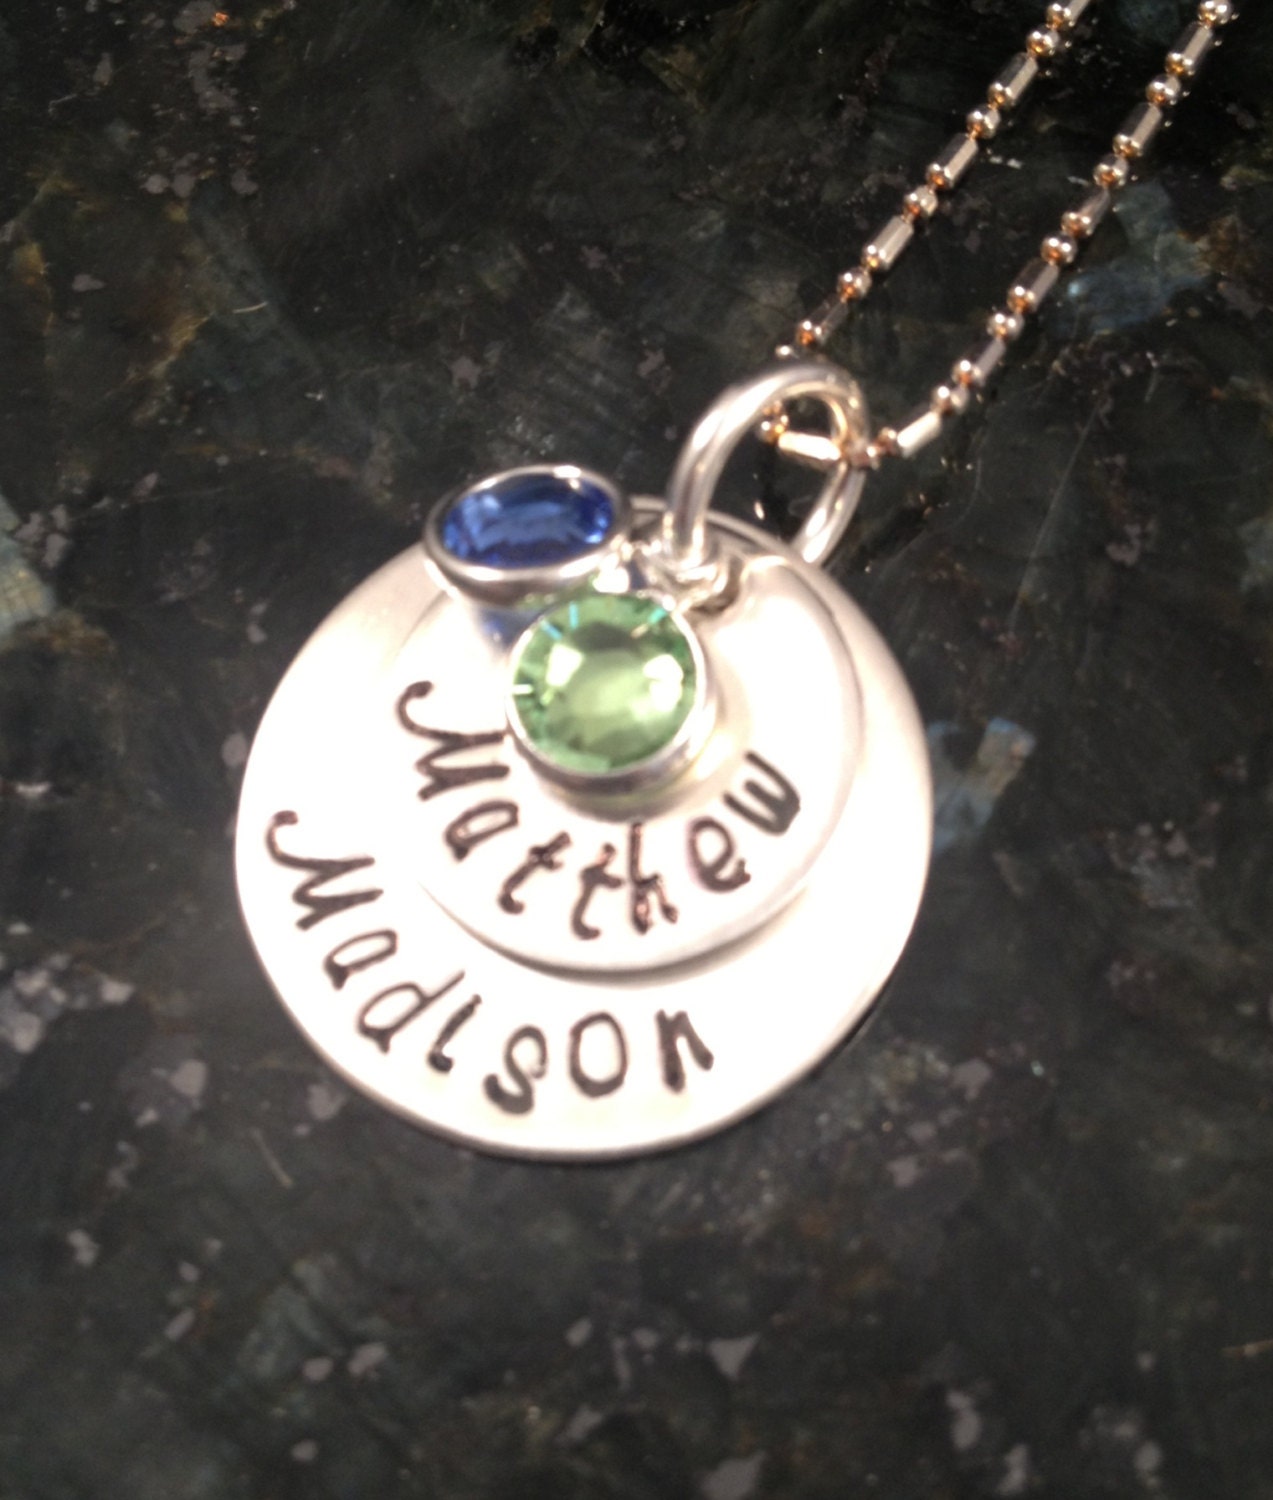 Necklaces For Mom With Kids Birthstones